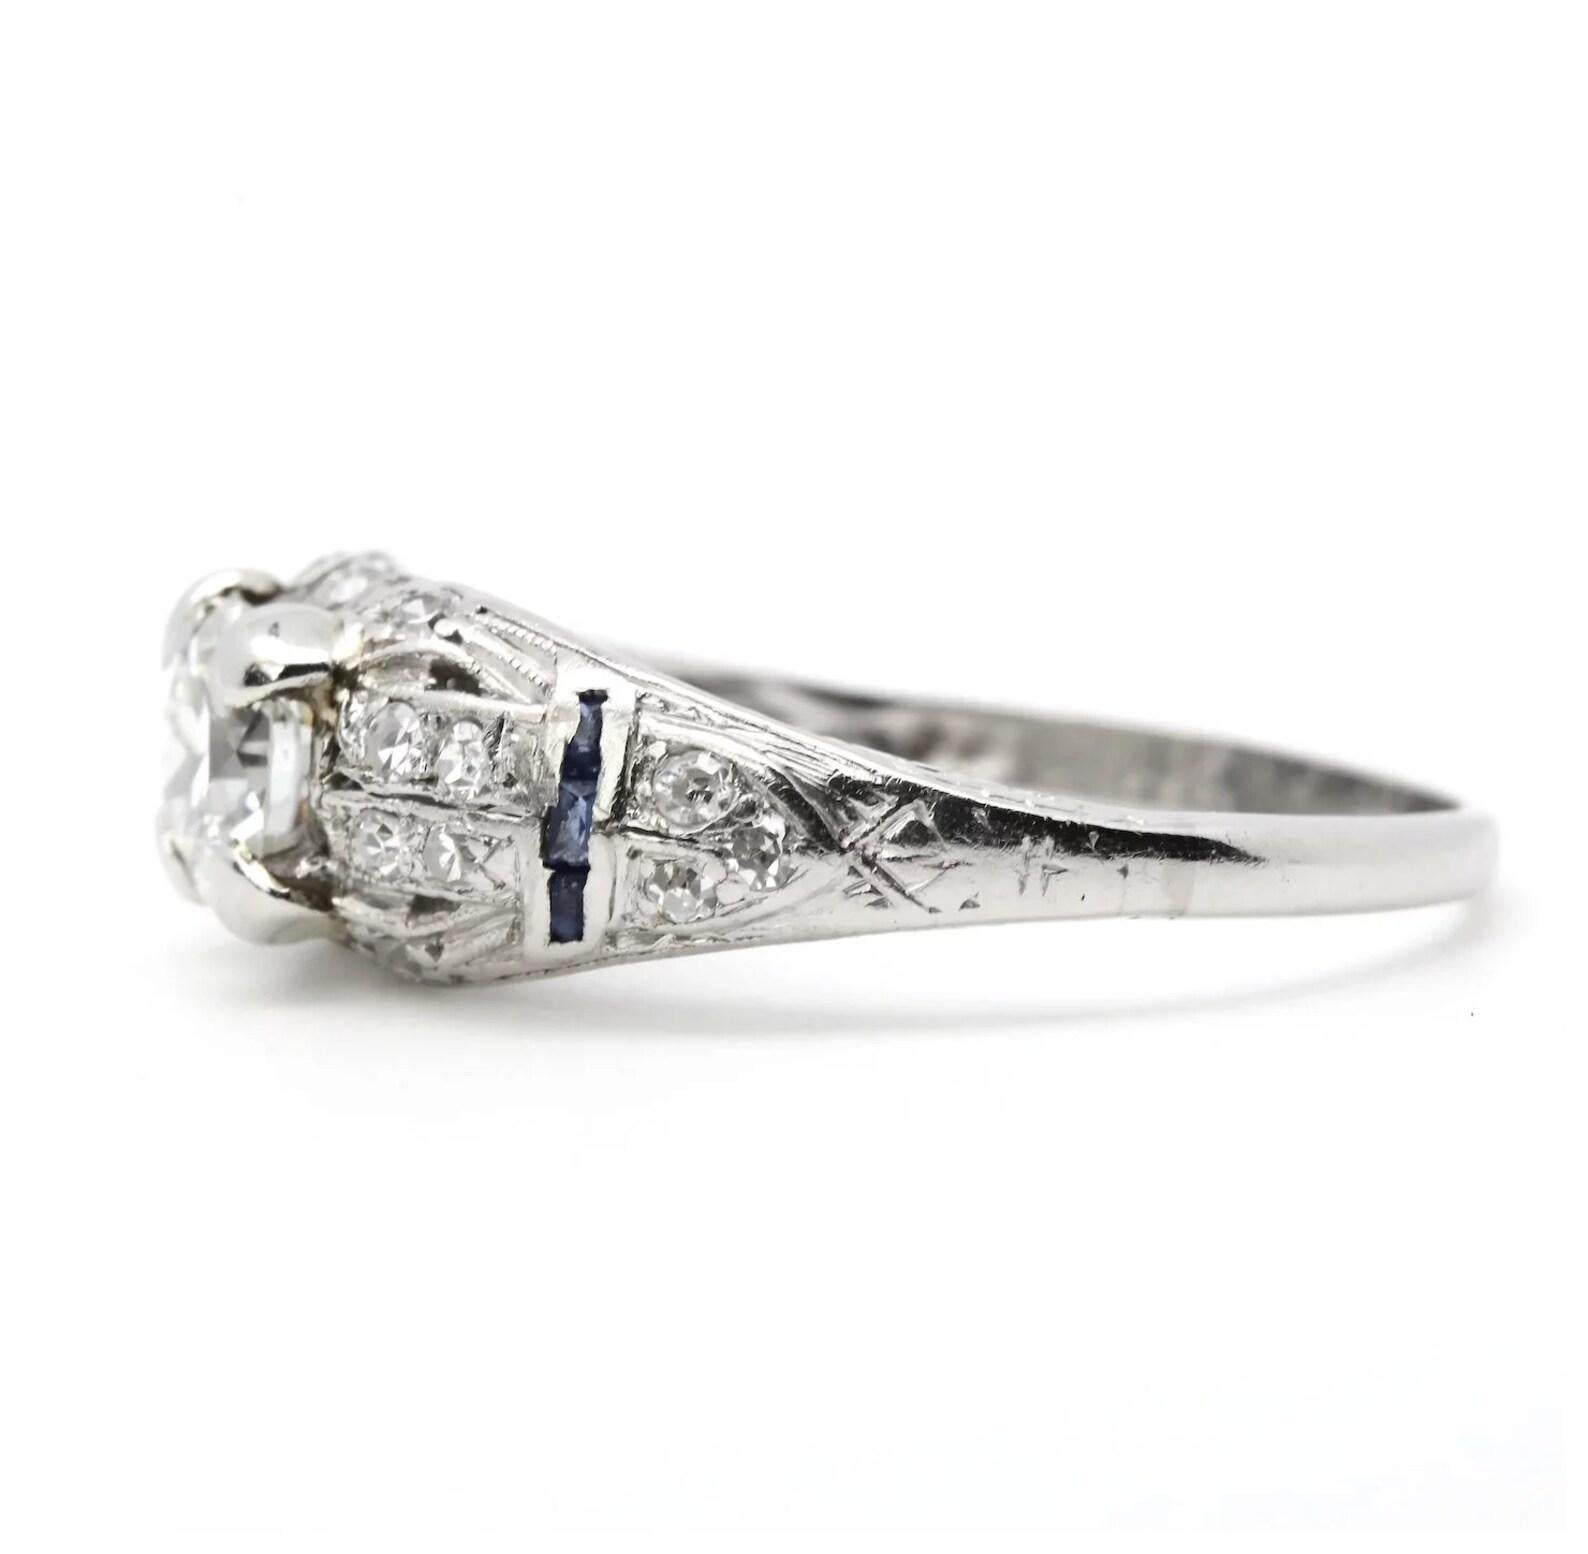 A handmade circa 1920's Art Deco period diamond and sapphire engagement ring in platinum. Centering this ring is a 0.70 carat G color SI1 clarity antique European cut diamond. Framing the center diamond are 22 pave set accenting diamonds and six